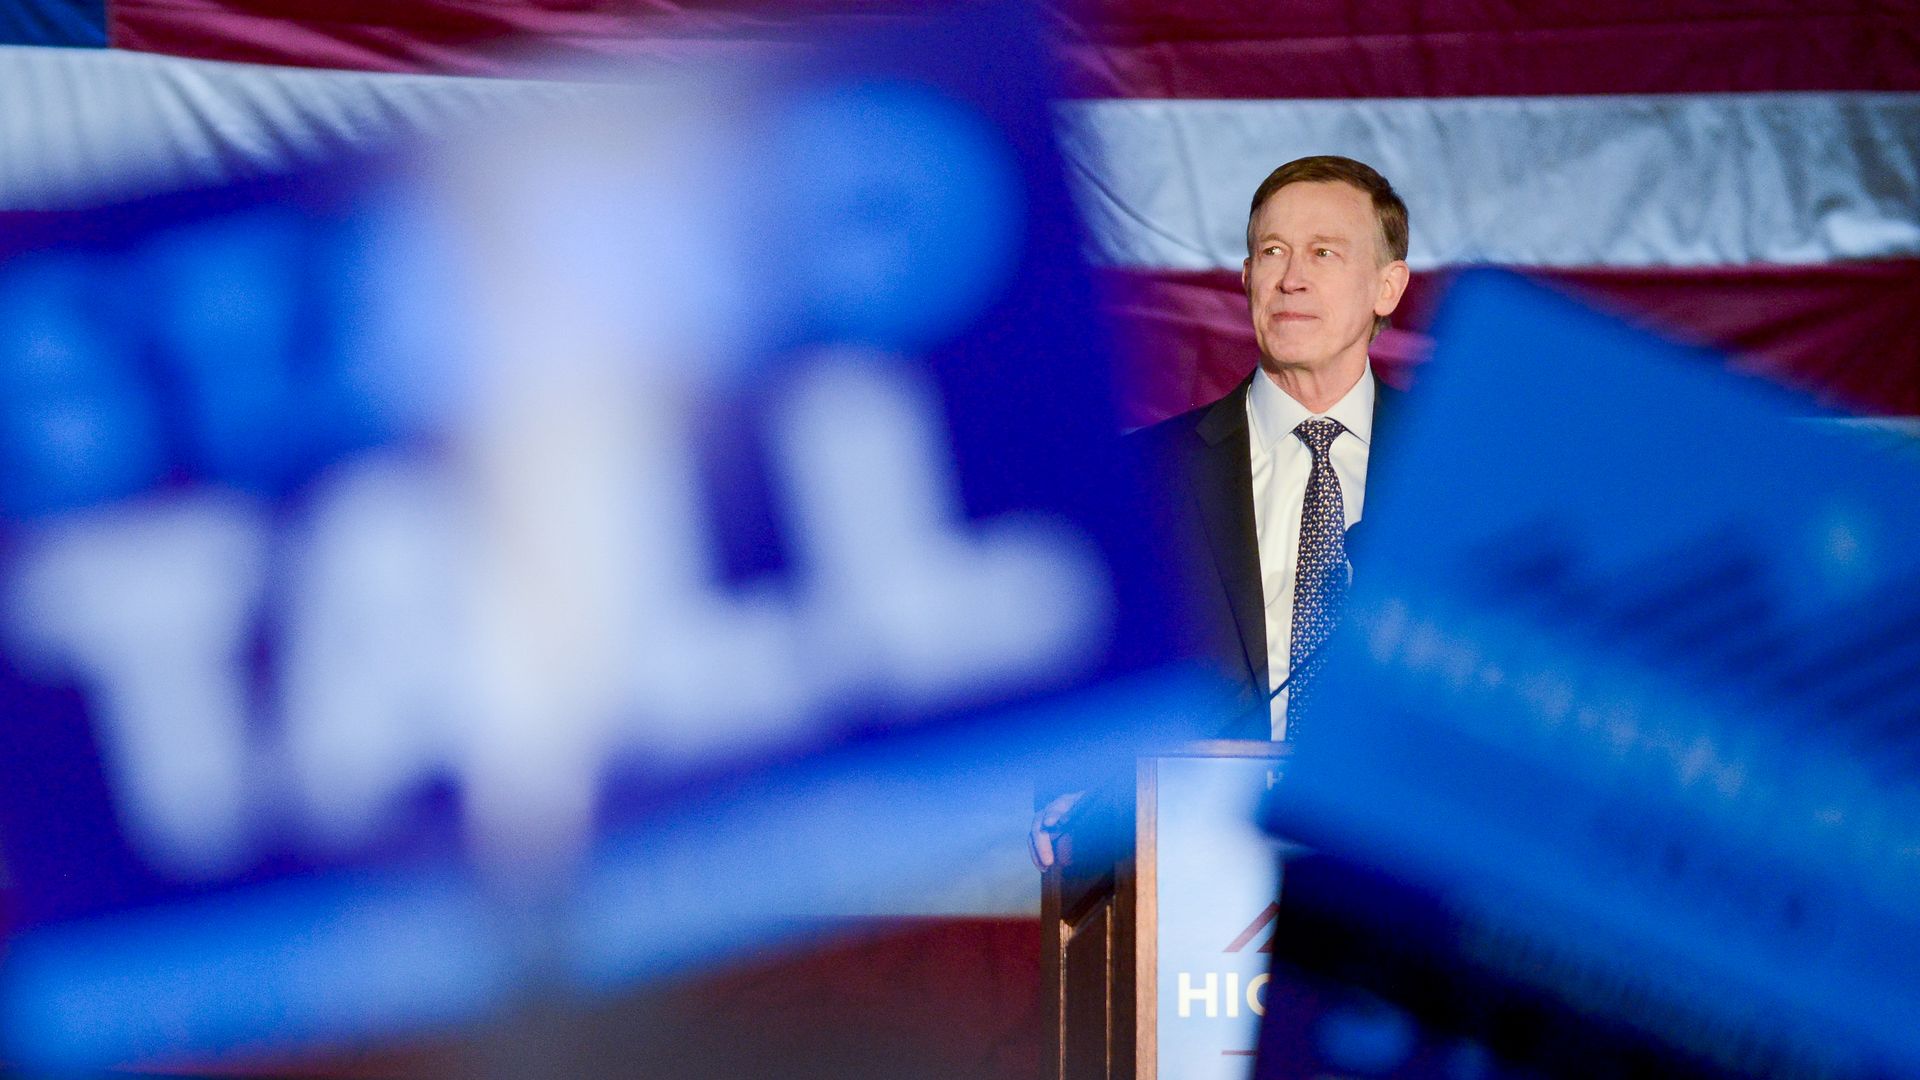 Hickenlooper speaks from behind a podium at a campaign rally, framed by blue signs. 